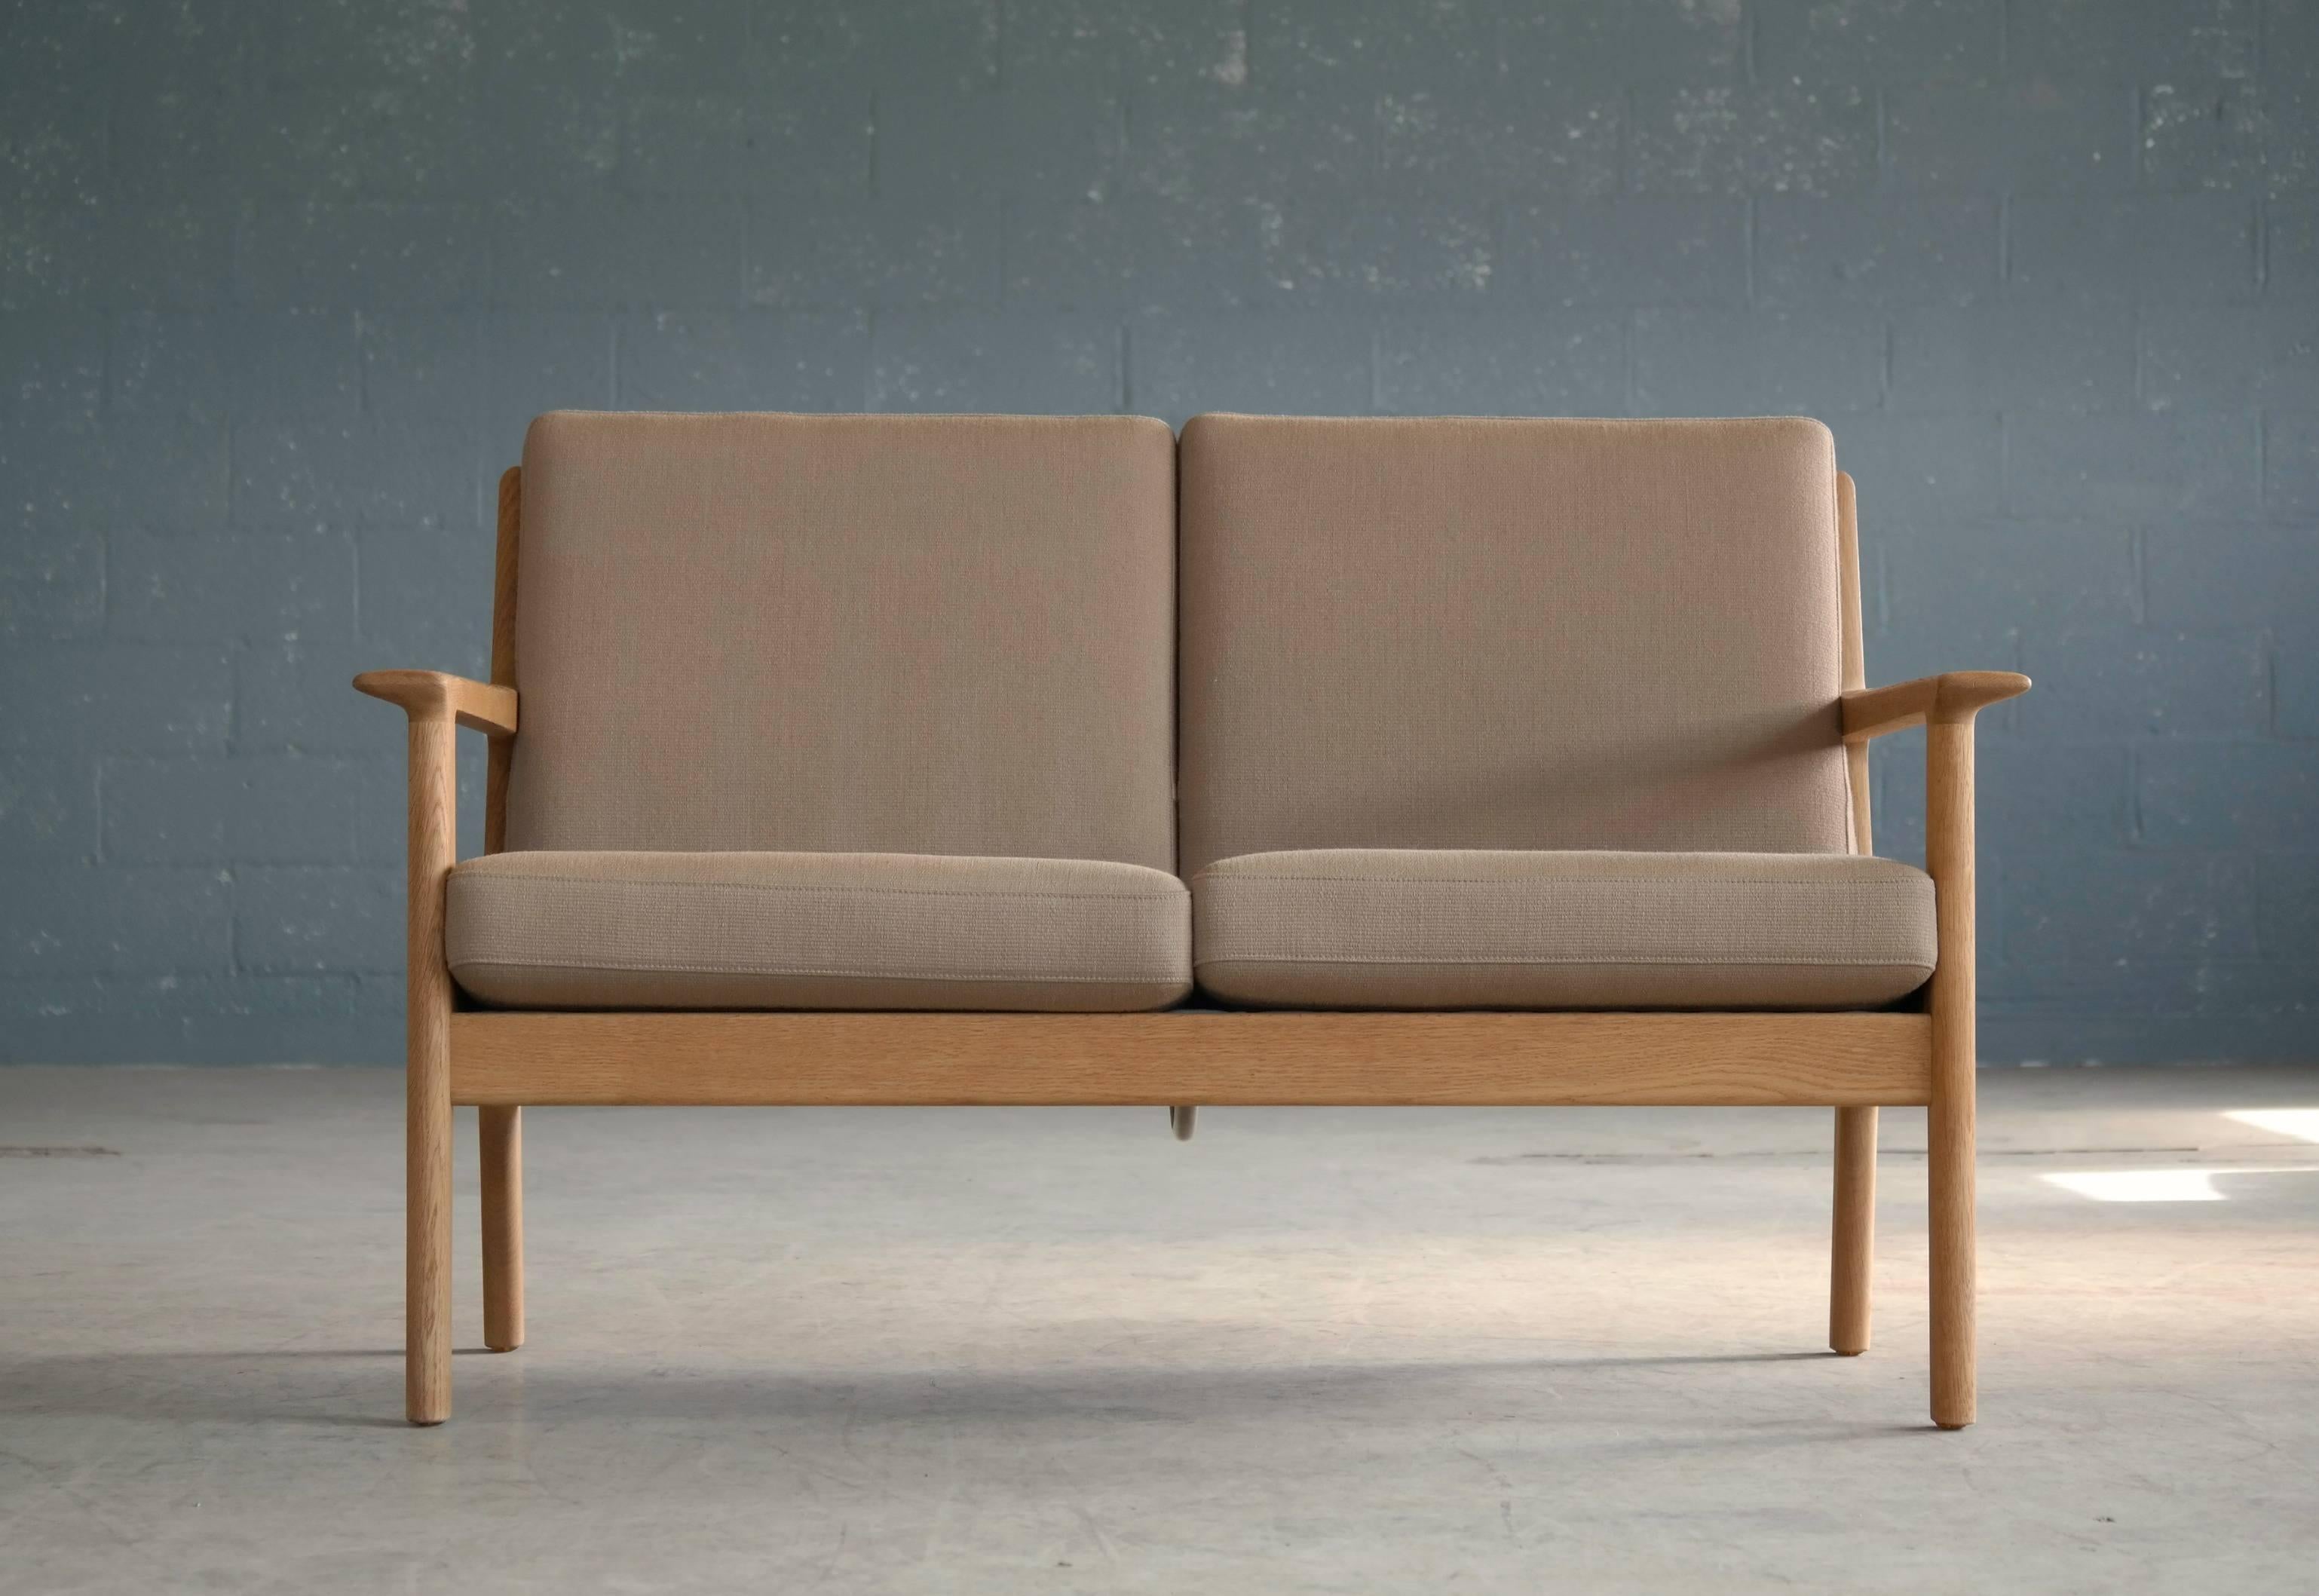 The model GE265 two-seat sofa designed by Hans J Wegner for GETAMA in the early 1970s featuring a solid oak frame and wool covered foam cushions. The cushions remain in their original wool. The sofa is in excellent vintage condition with a nice